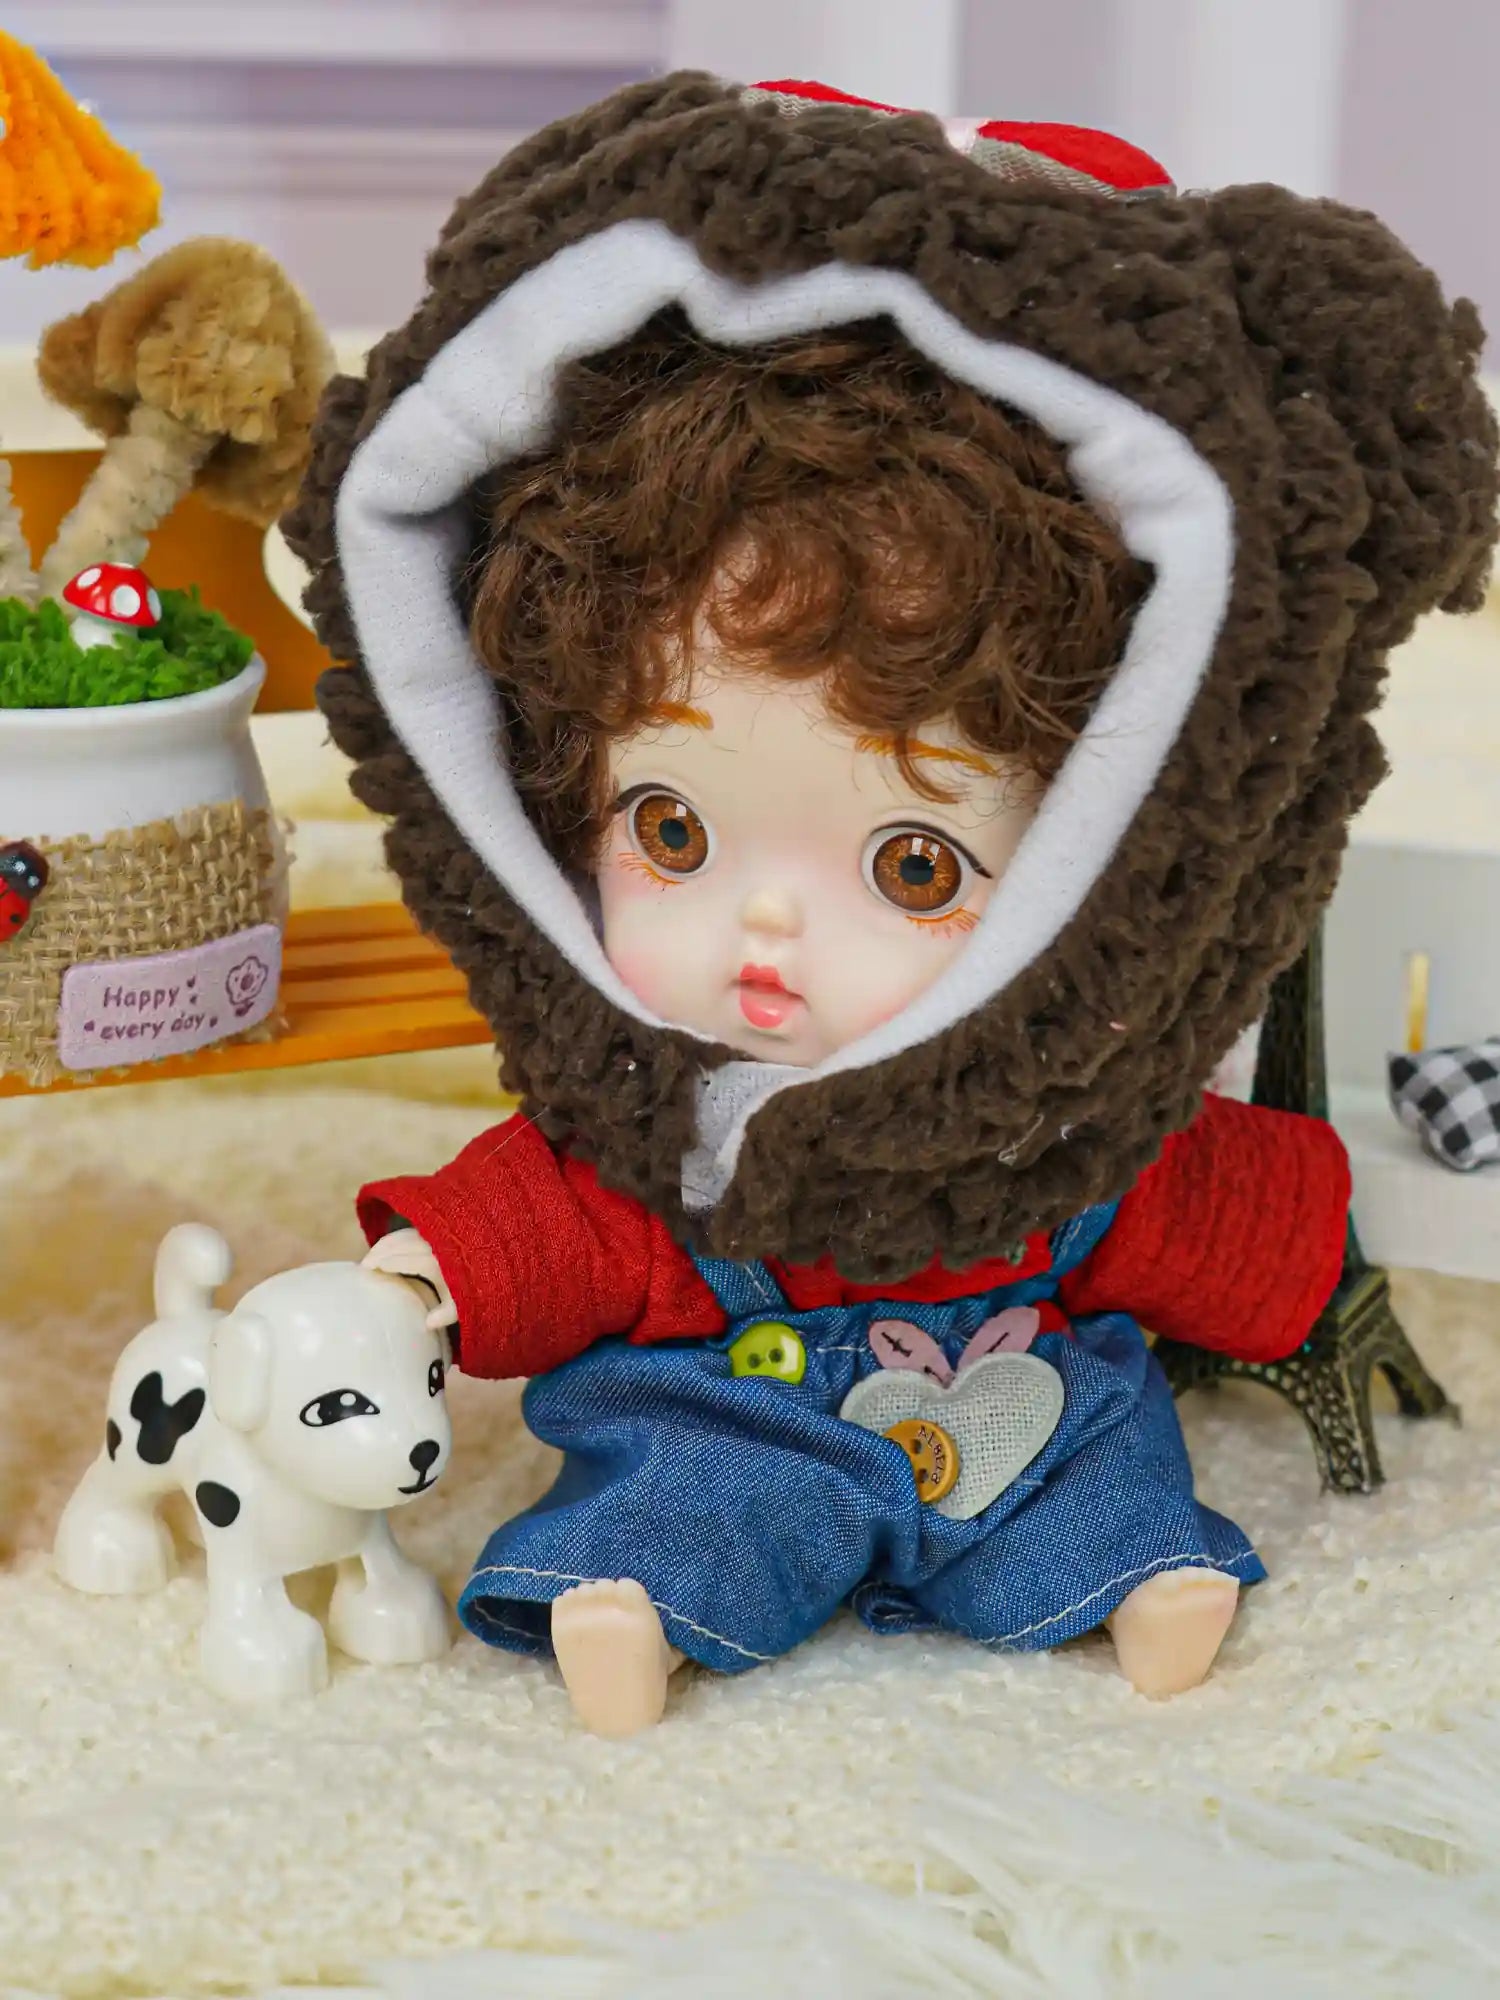 A cute doll with curly hair and a bear hood, standing next to a miniature Eiffel Tower and a white puppy toy.